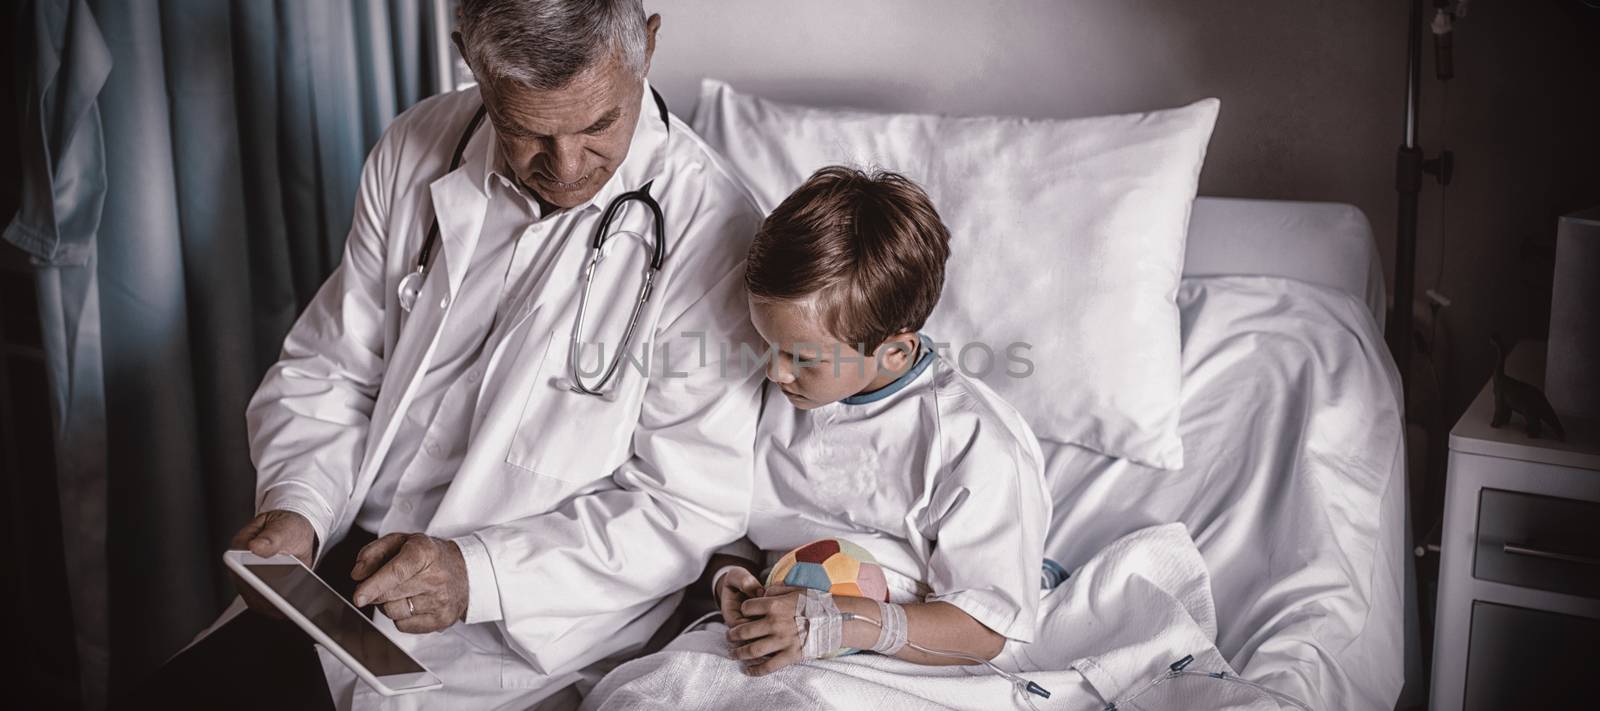 Doctor showing medical report in digital tablet to patient in hospital